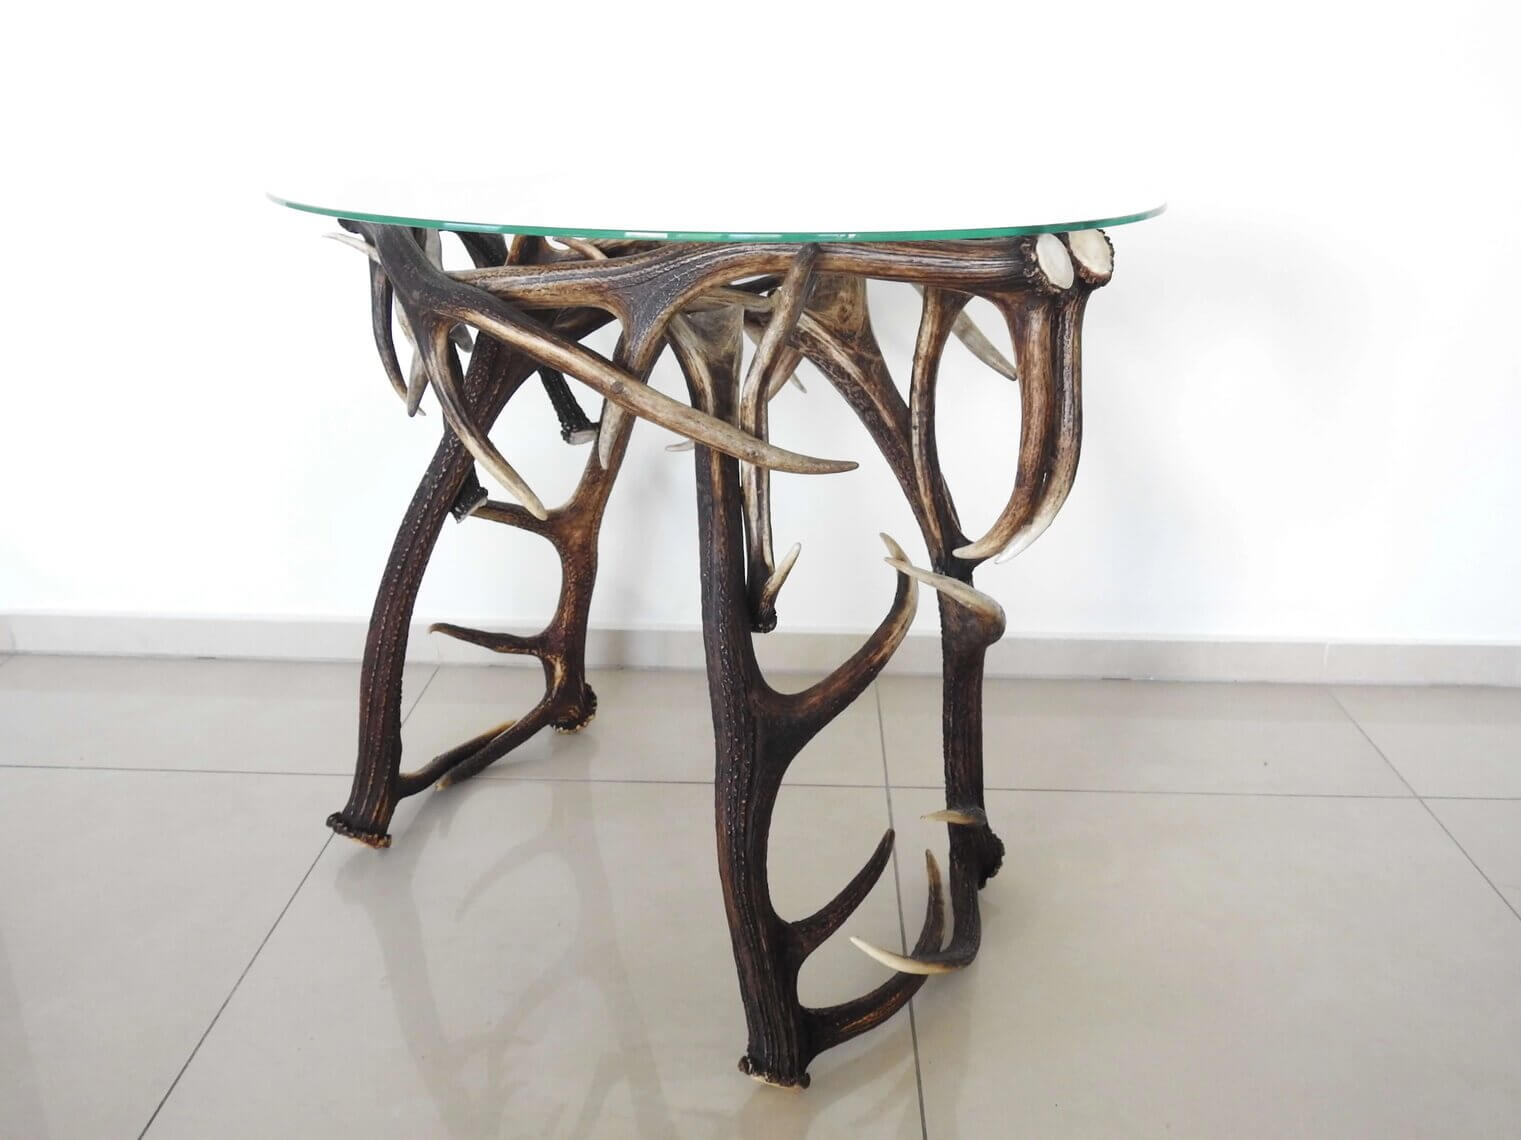 Antler table